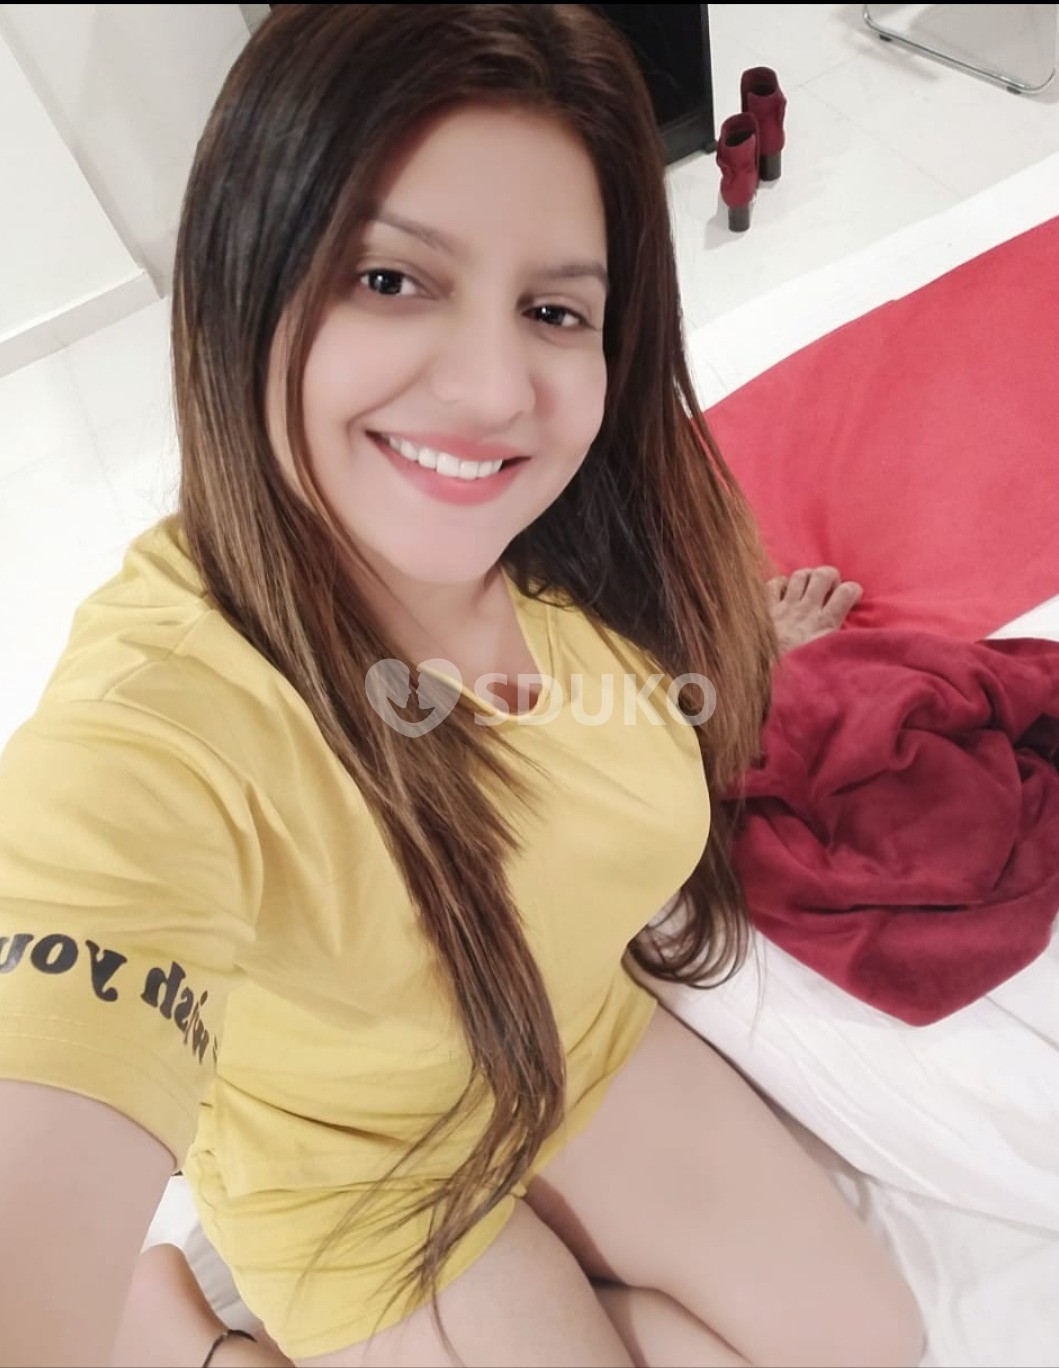 KASHIPUR HOT AND HIGH PROFILE VIP CALL 24 X 7 HRS AVAILABLE